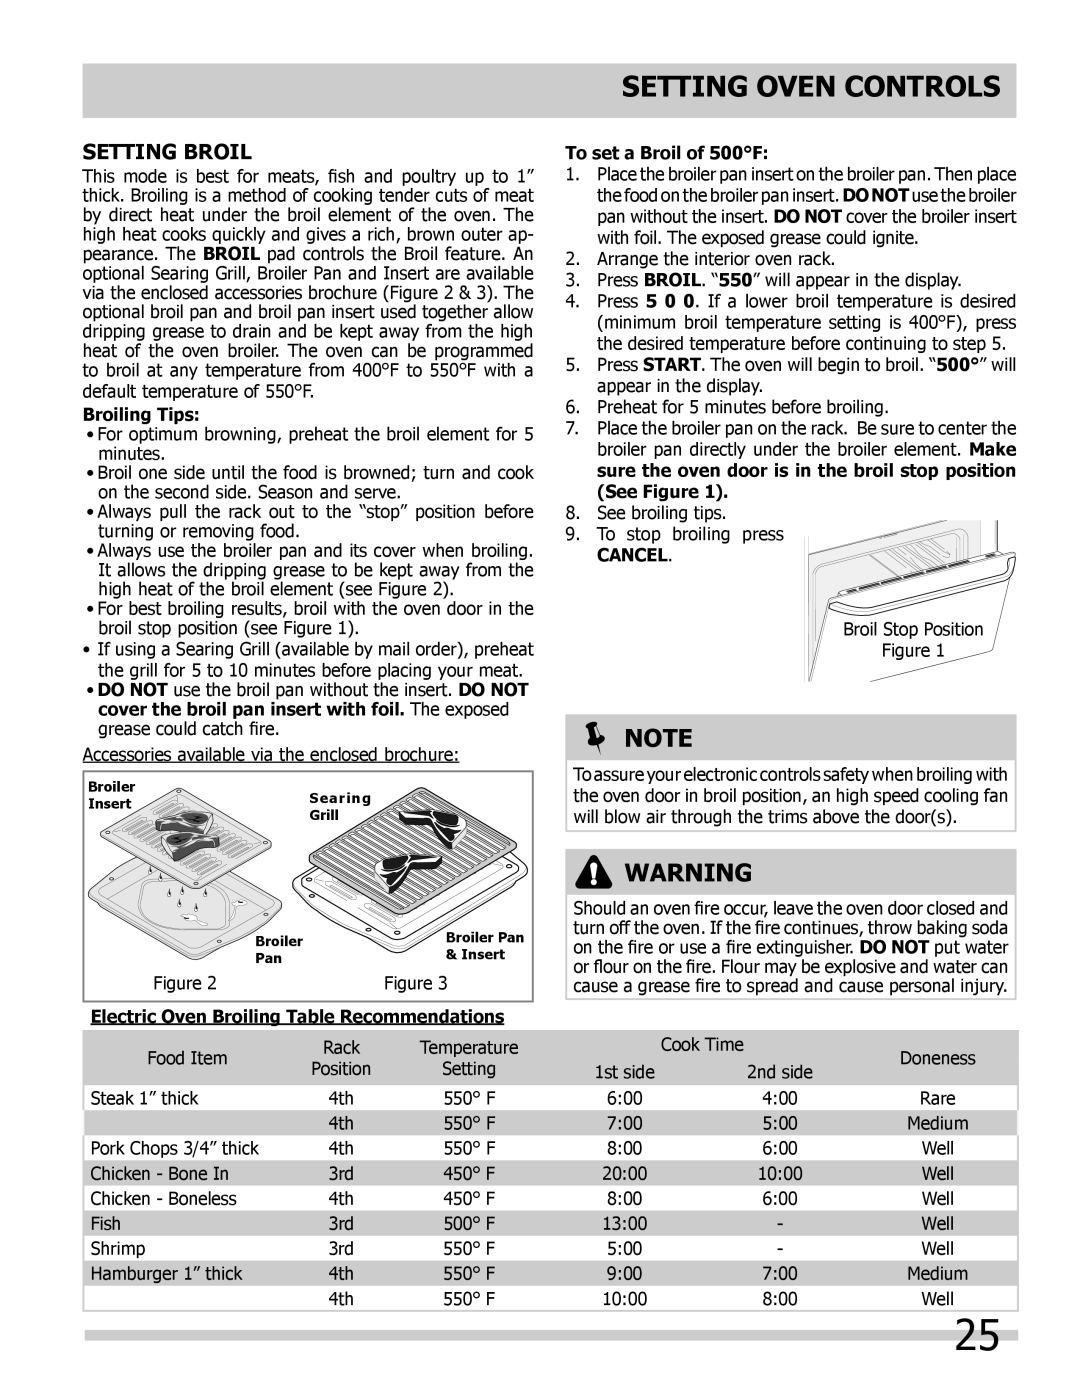 Frigidaire 318205854 Setting Broil, Broiling Tips, Electric Oven Broiling Table Recommendations, To set a Broil of 500F 